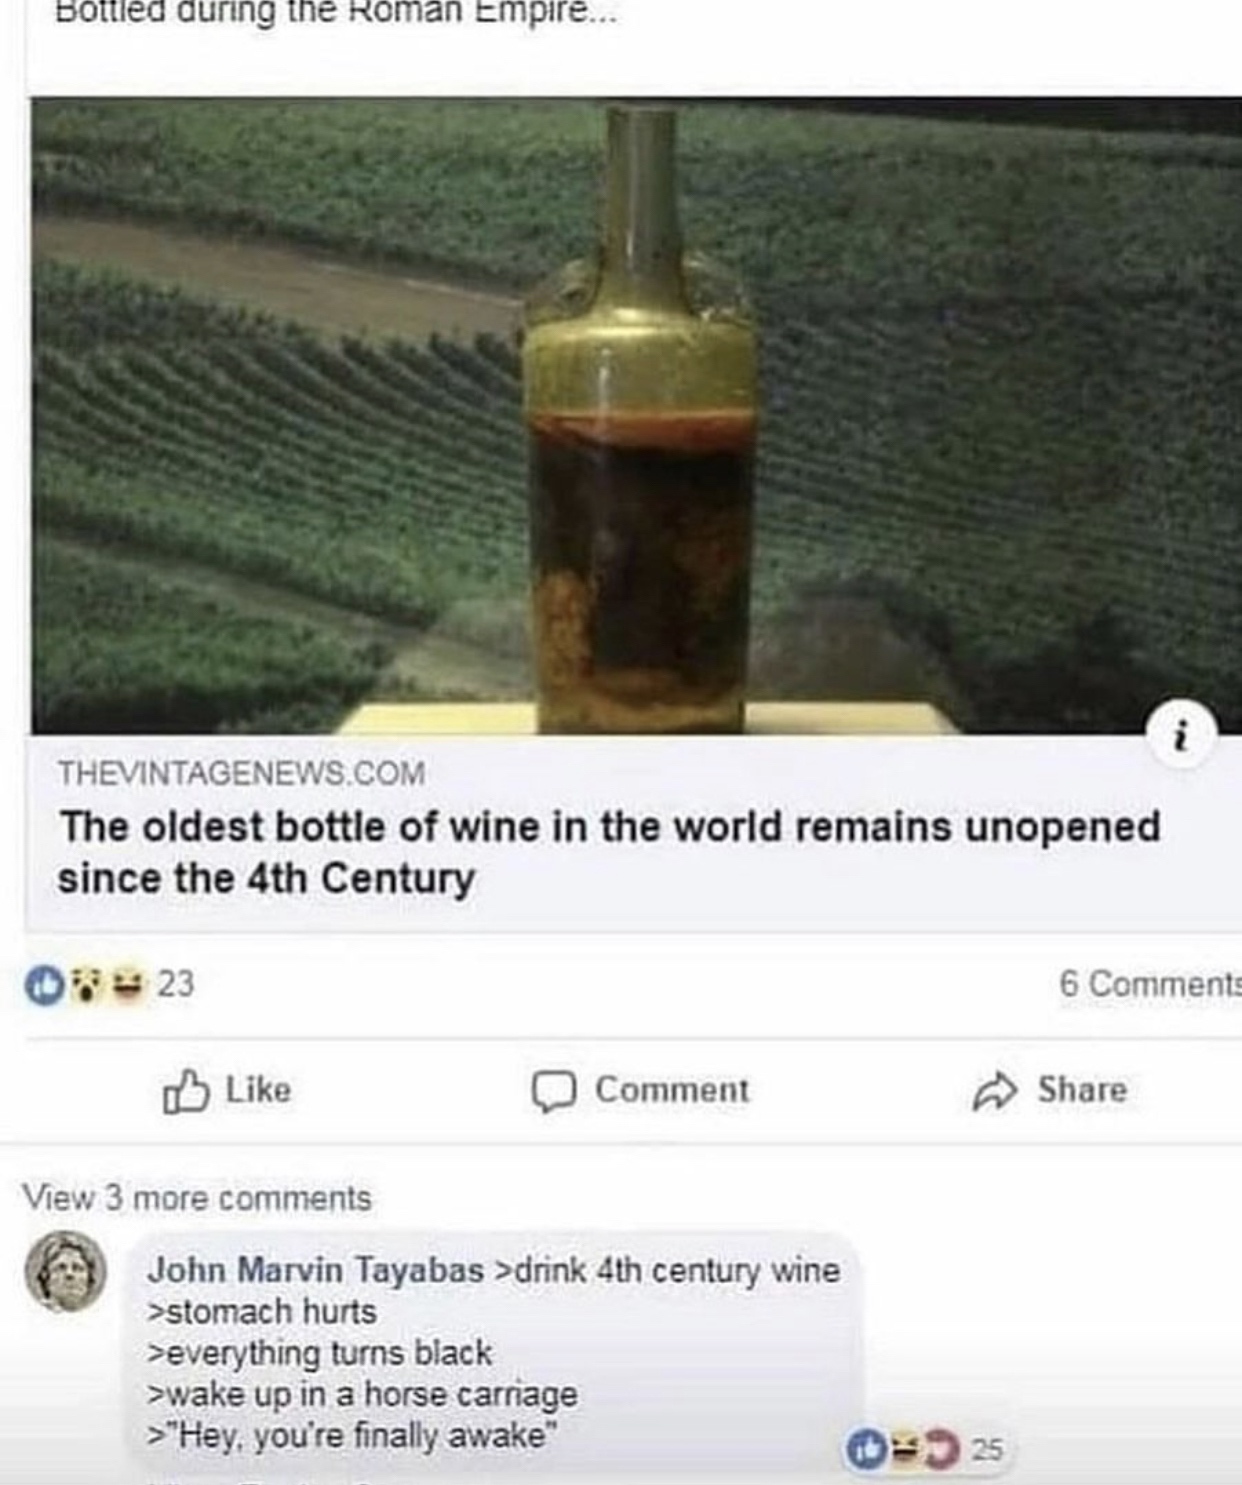 skyrim memes - Bottled during the Roman Empire... Thevintagenews.Com The oldest bottle of wine in the world remains unopened since the 4th Century 0723 6 0 Comment View 3 more John Marvin Tayabas >drink 4th century wine >stomach hurts >everything turns bl